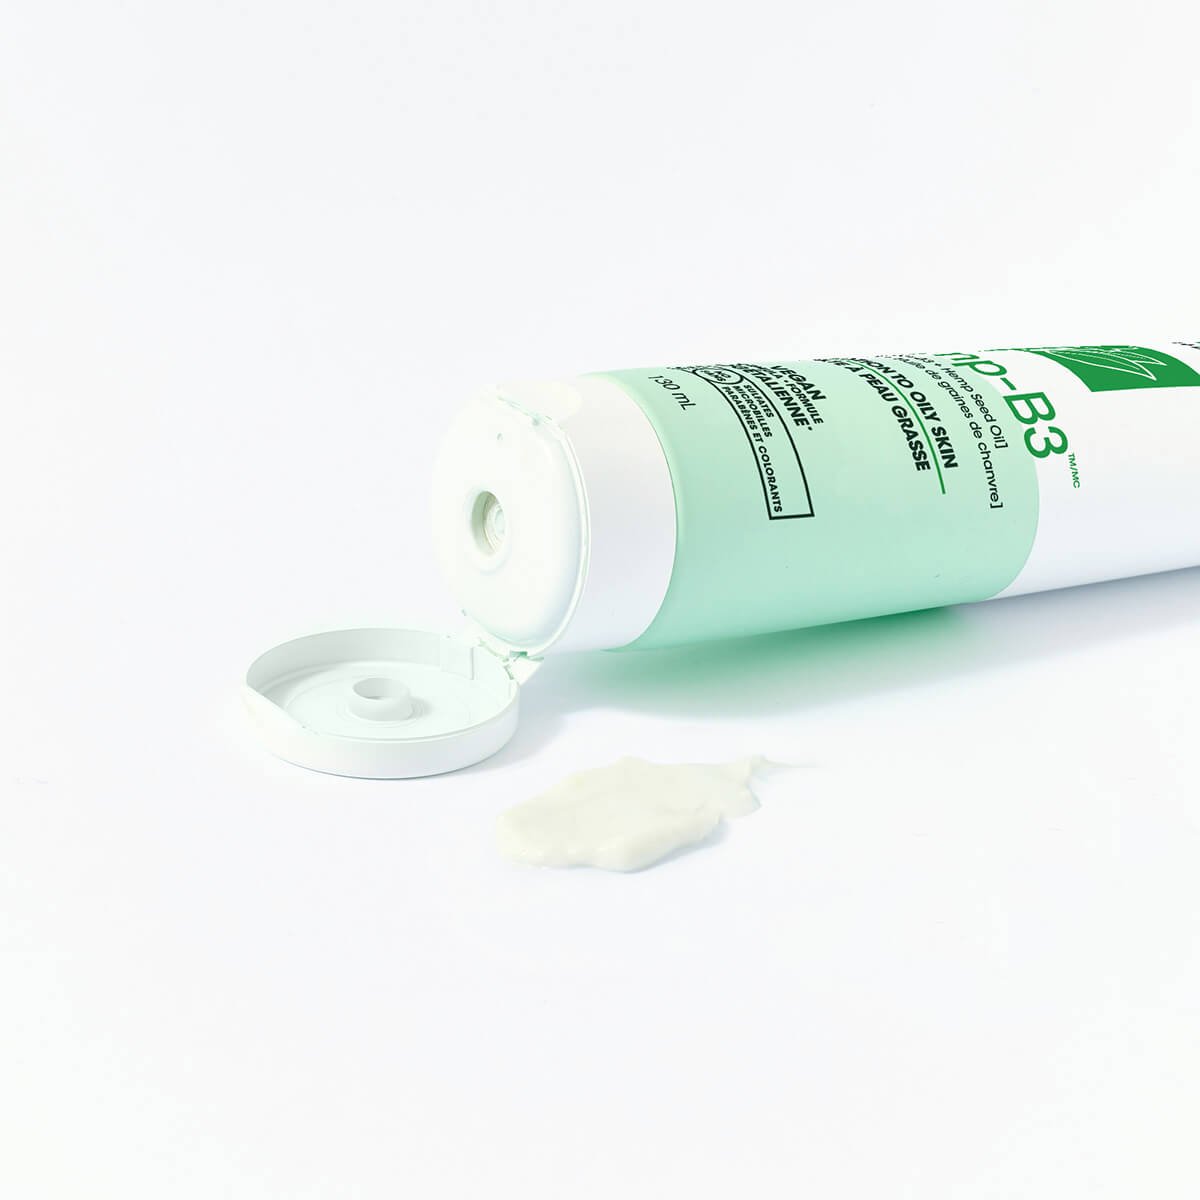 Green labs cleanser niacinamide IMAGE3